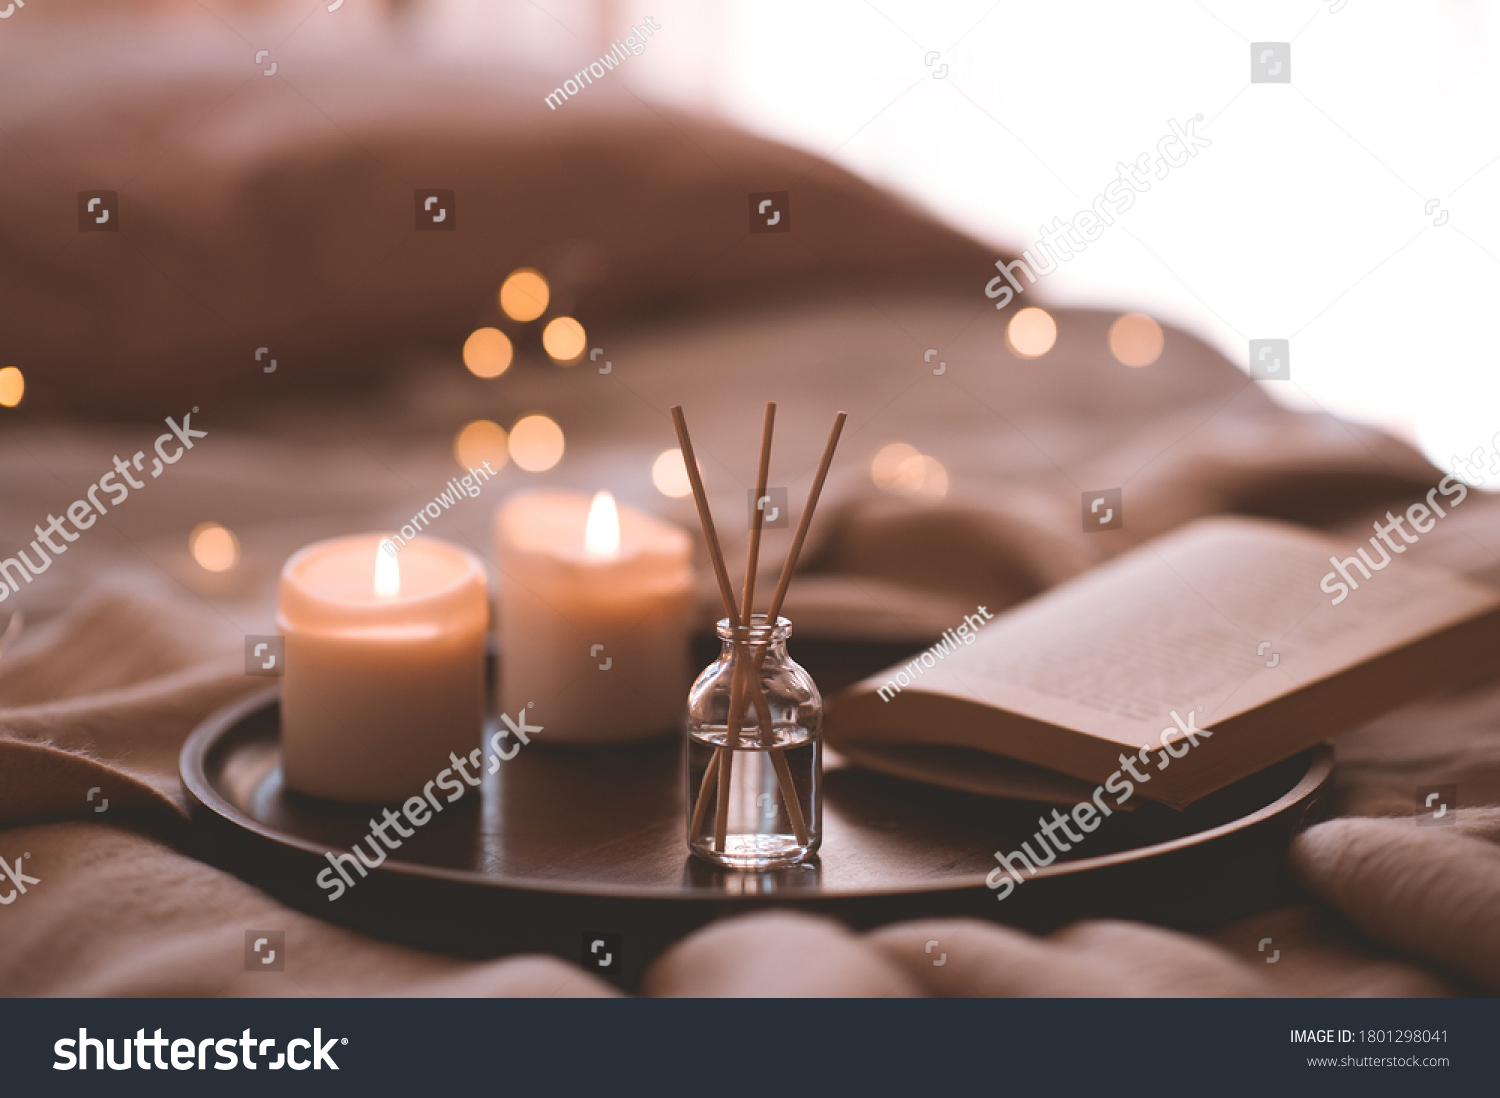 Bamboo sticks in bottle with scented candles and open book on wooden tray in bed closeup. Home aroma.  #1801298041